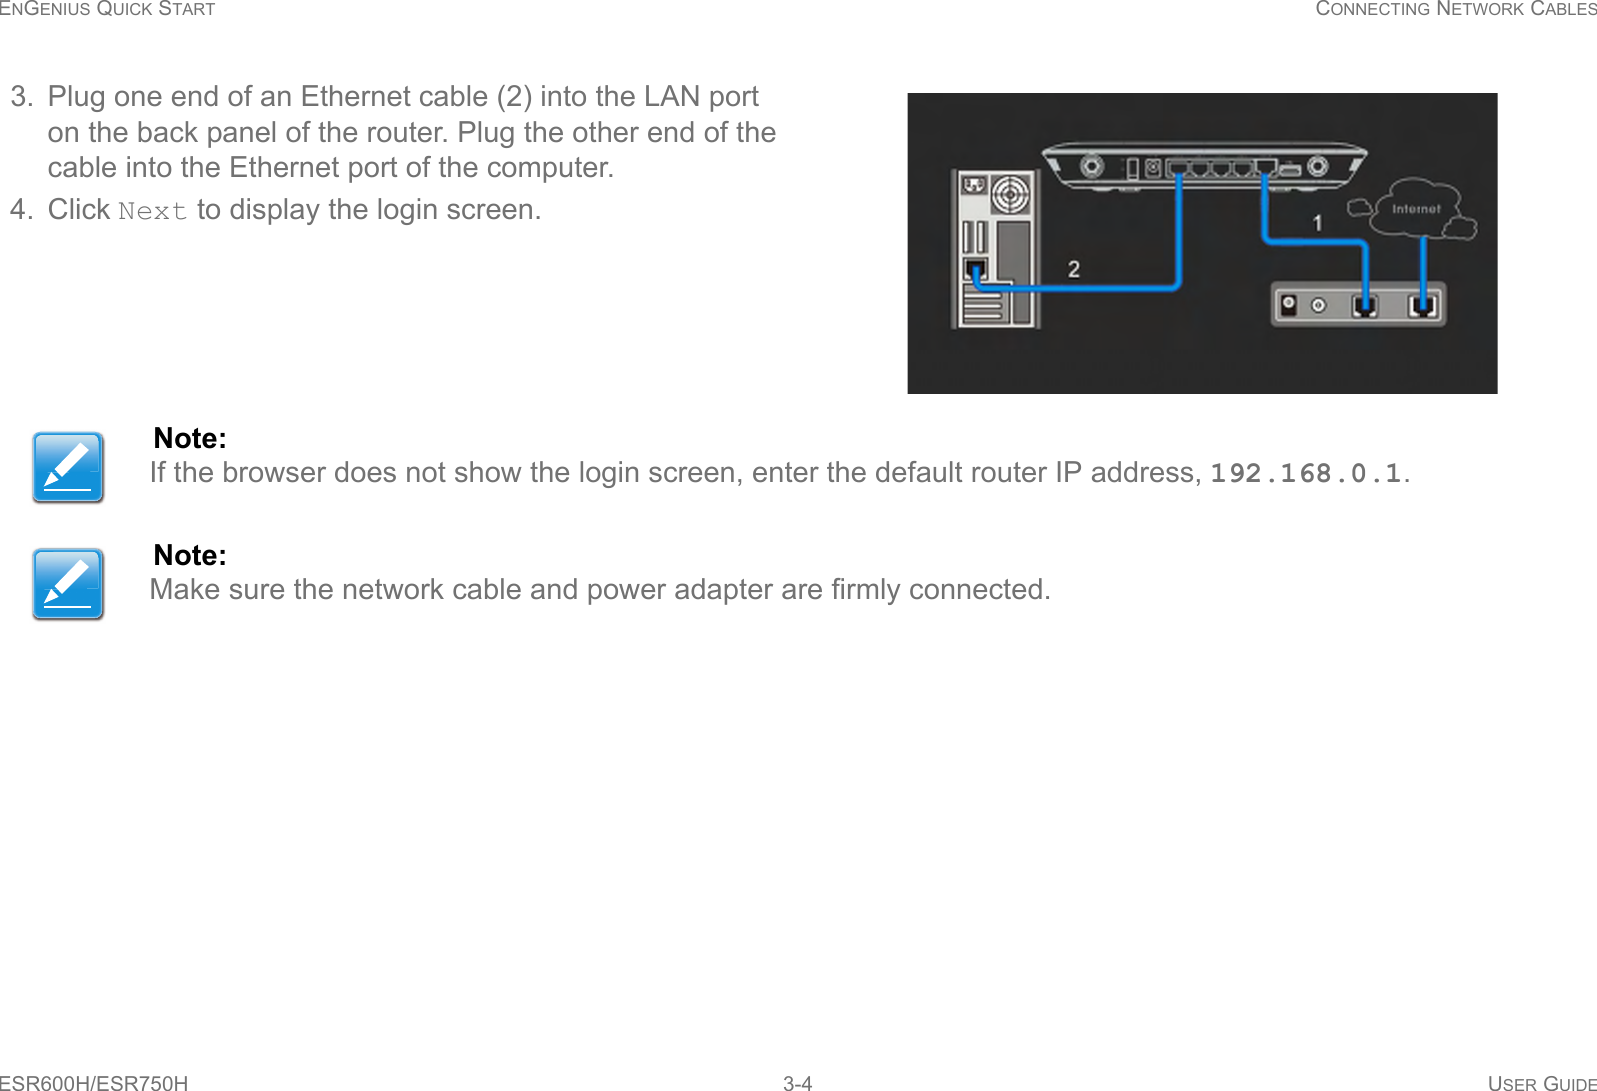 ENGENIUS QUICK START CONNECTING NETWORK CABLESESR600H/ESR750H 3-4 USER GUIDE3. Plug one end of an Ethernet cable (2) into the LAN port on the back panel of the router. Plug the other end of the cable into the Ethernet port of the computer.4. Click Next to display the login screen.Note:If the browser does not show the login screen, enter the default router IP address, 192.168.0.1.Note:Make sure the network cable and power adapter are firmly connected.